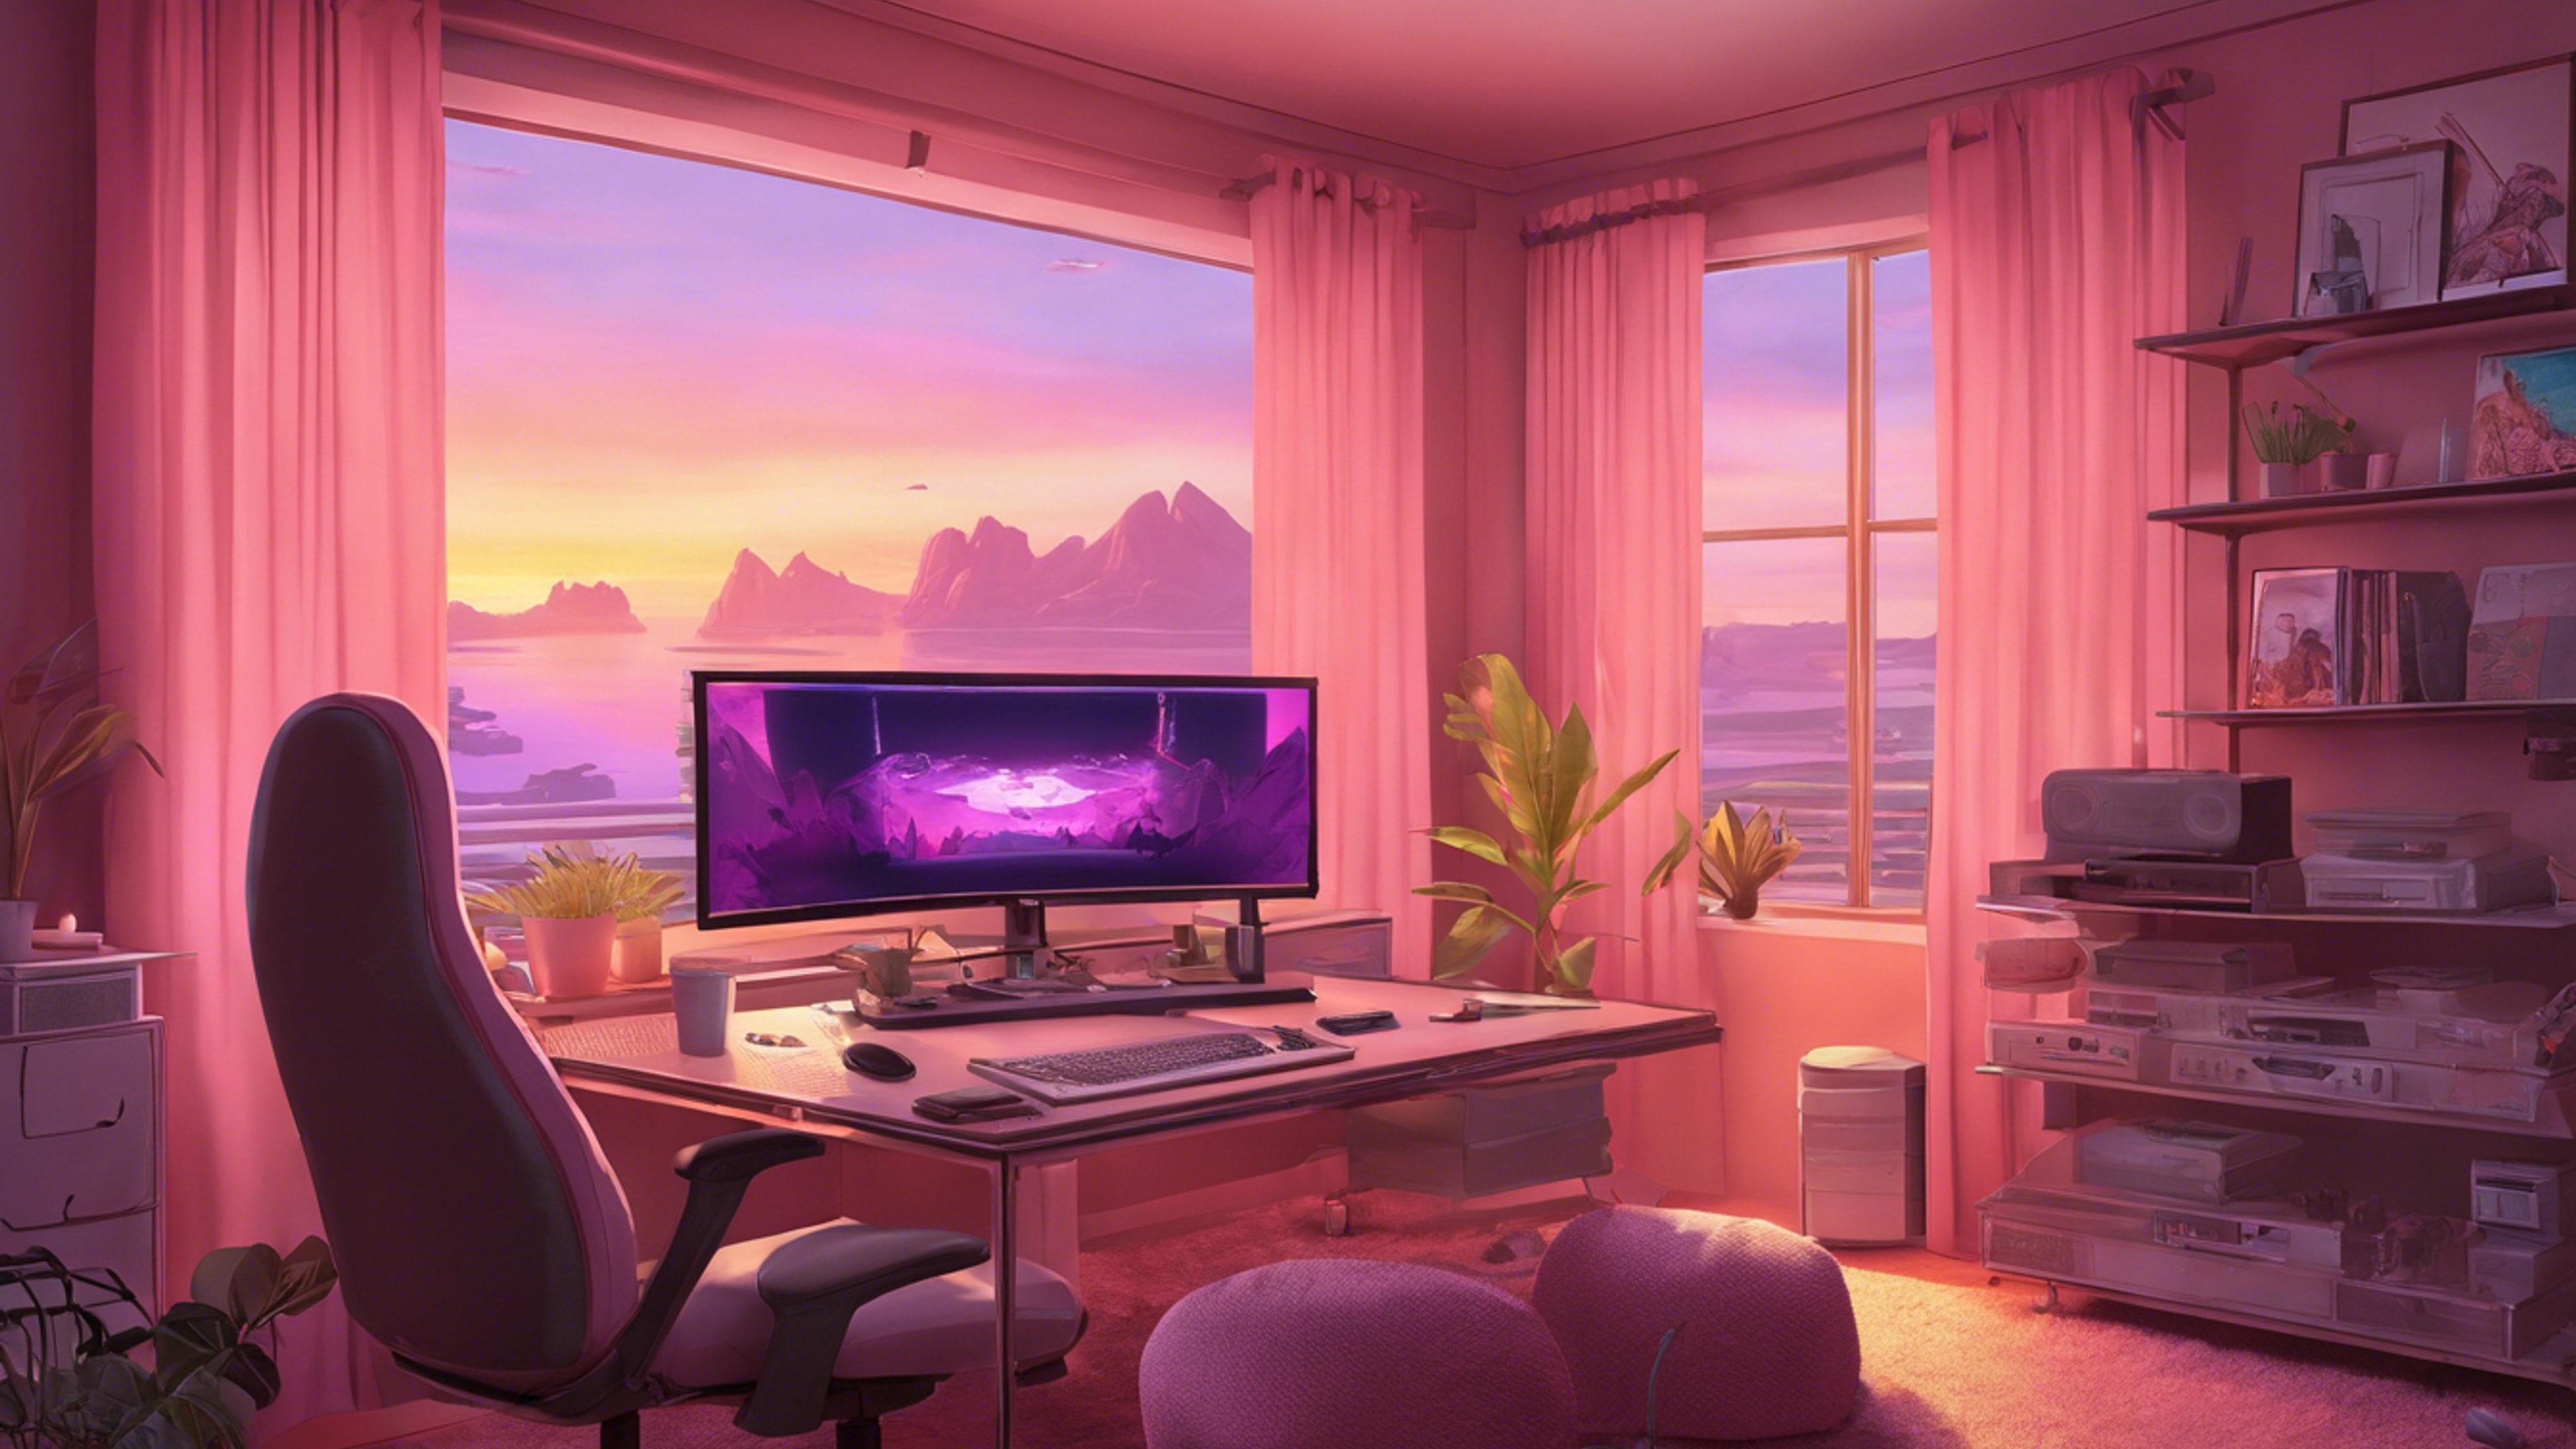 A beautiful shot of a gaming room at dusk with pastel pink curtains slightly drawn, allowing soft sunset hues to blend with the gaming setup's ambient light. Ფონი[98f2c4ff56214265aa5c]